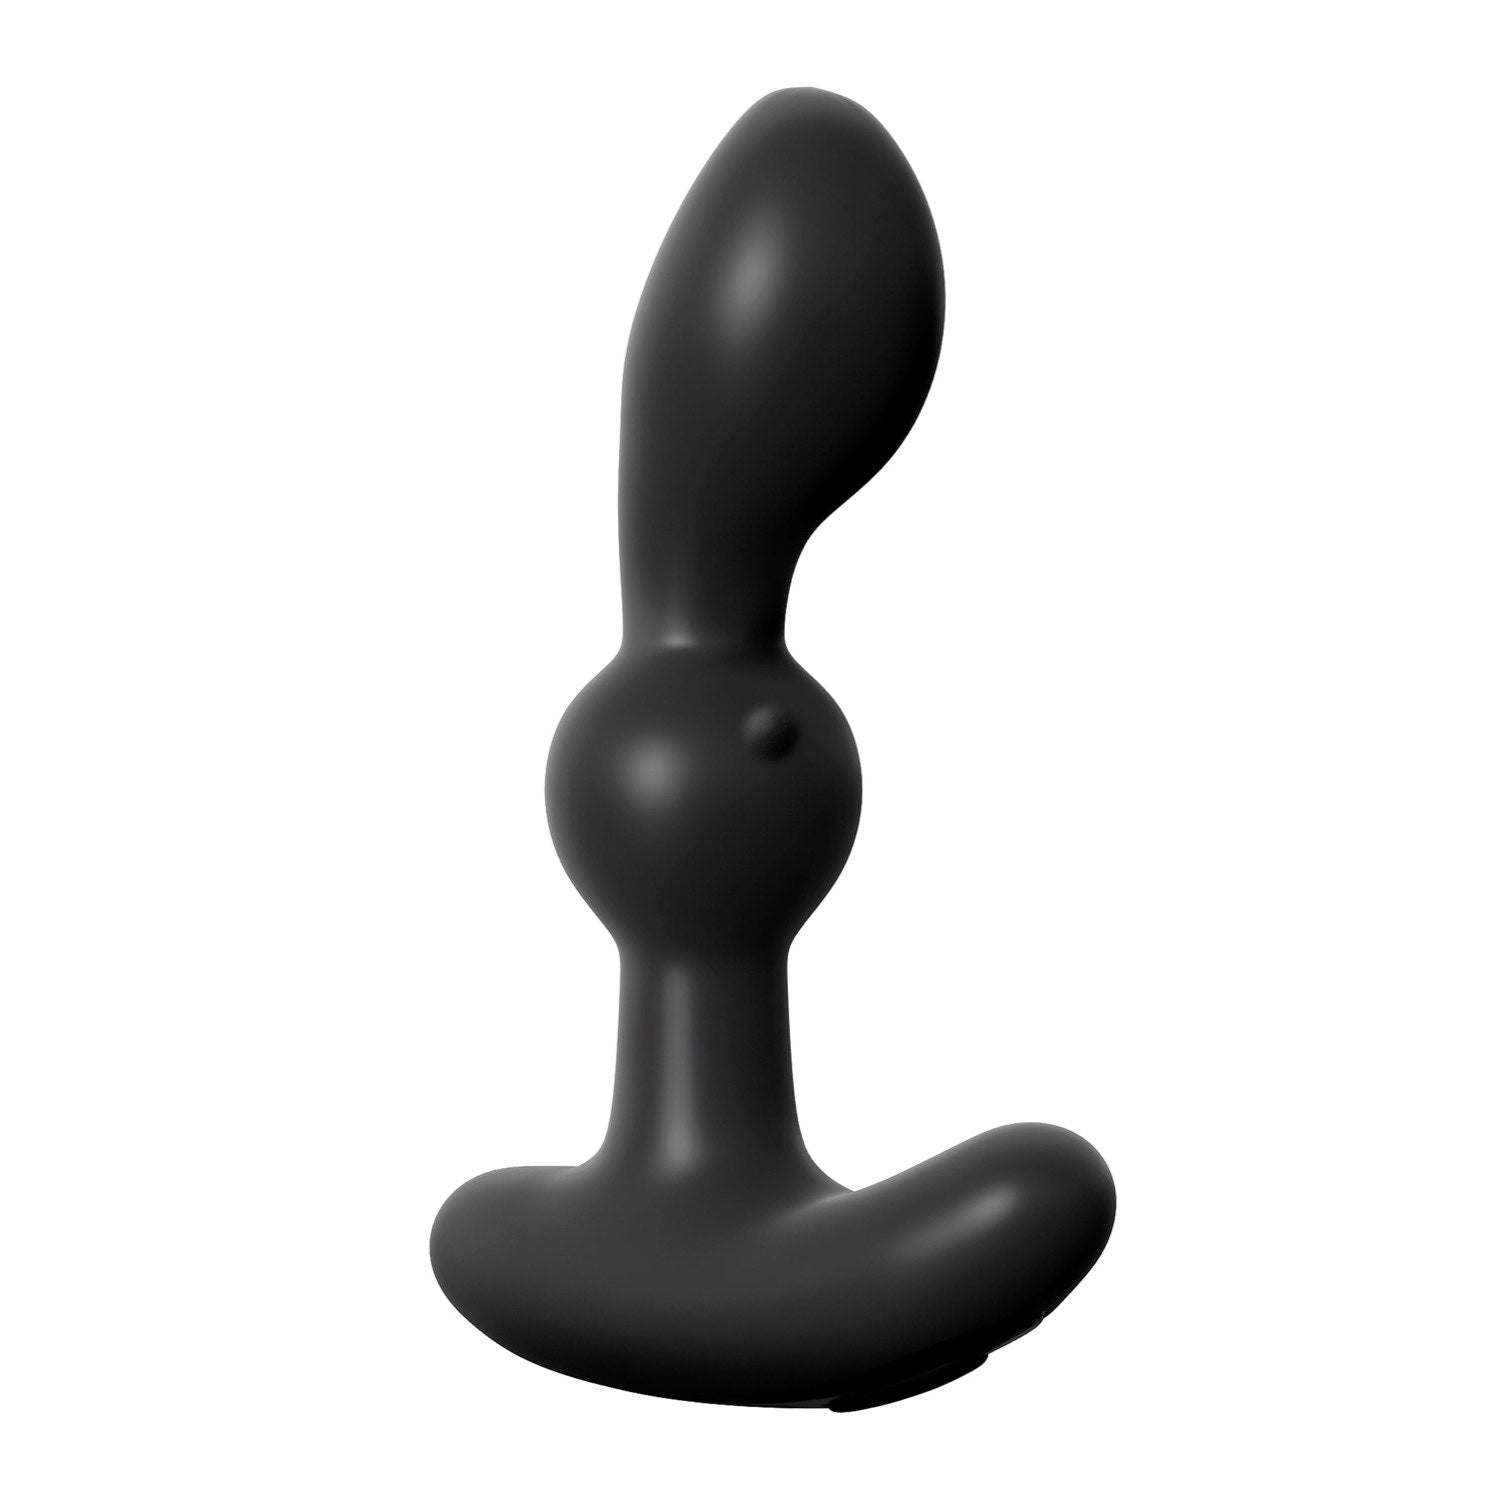 Anal Fantasy Elite Collection P-Motion Massager - Black USB Rechargeable Vibrating &amp; Rocking Prostate Massager by Pipedream